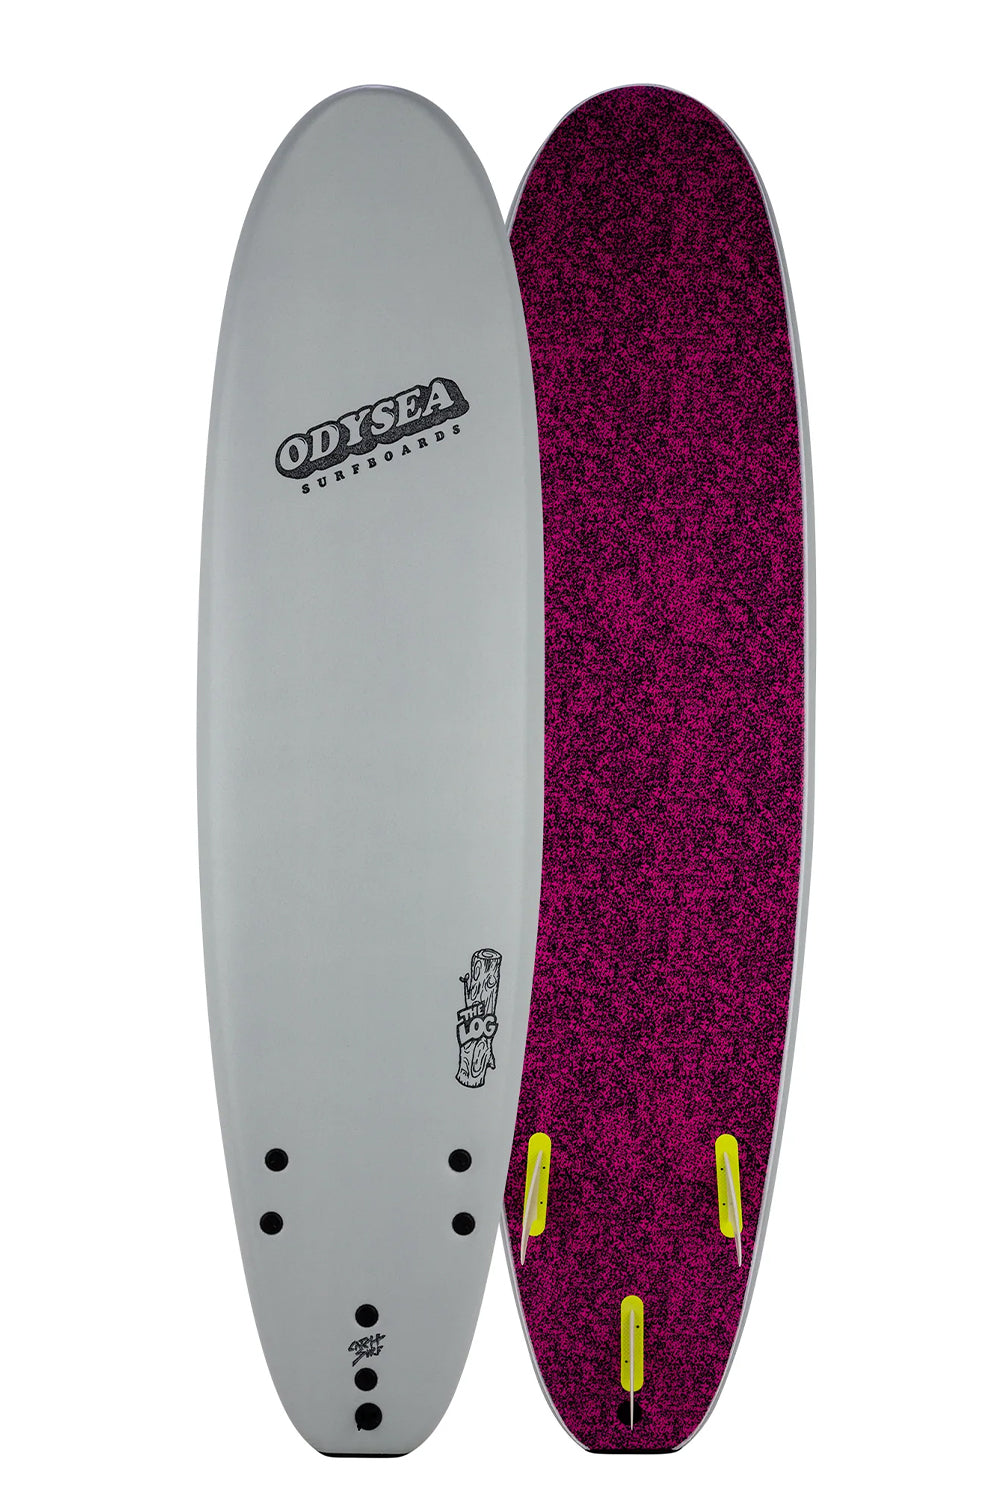 9'0 Catch Surf Odysea Log Softboard - Comes with fins